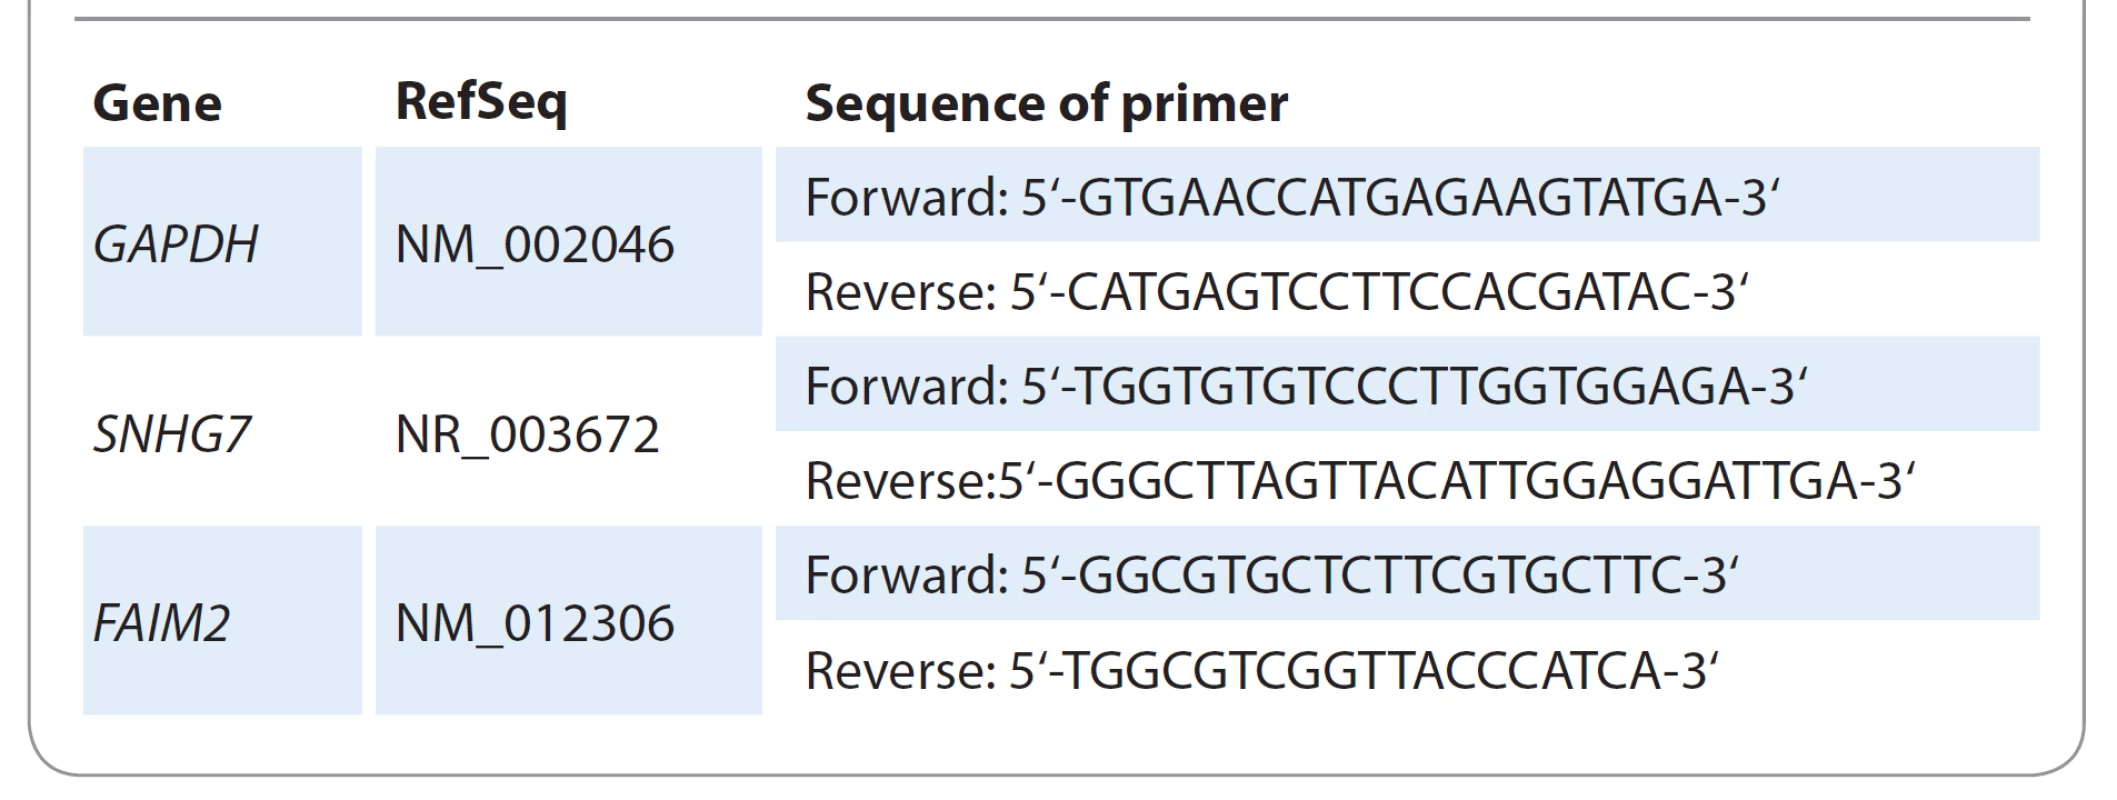 Sequence of primers for GAPDH, SNHG7 and FAIM2 genes.